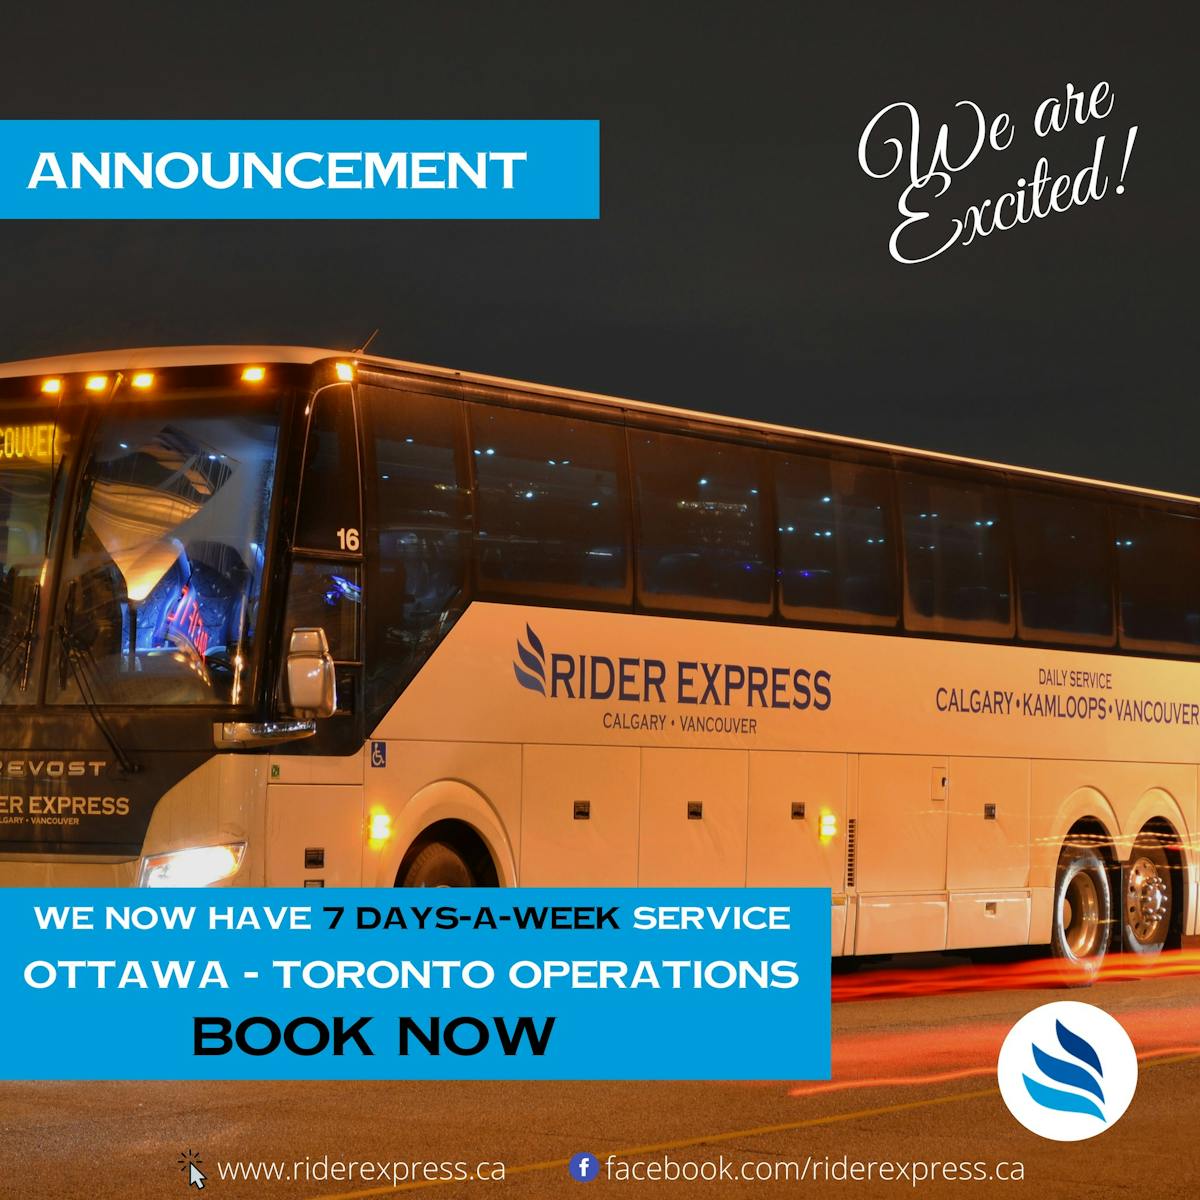 Rider Express is excited to announce 7 Days-A-Week bus service between Ottawa and Toronto